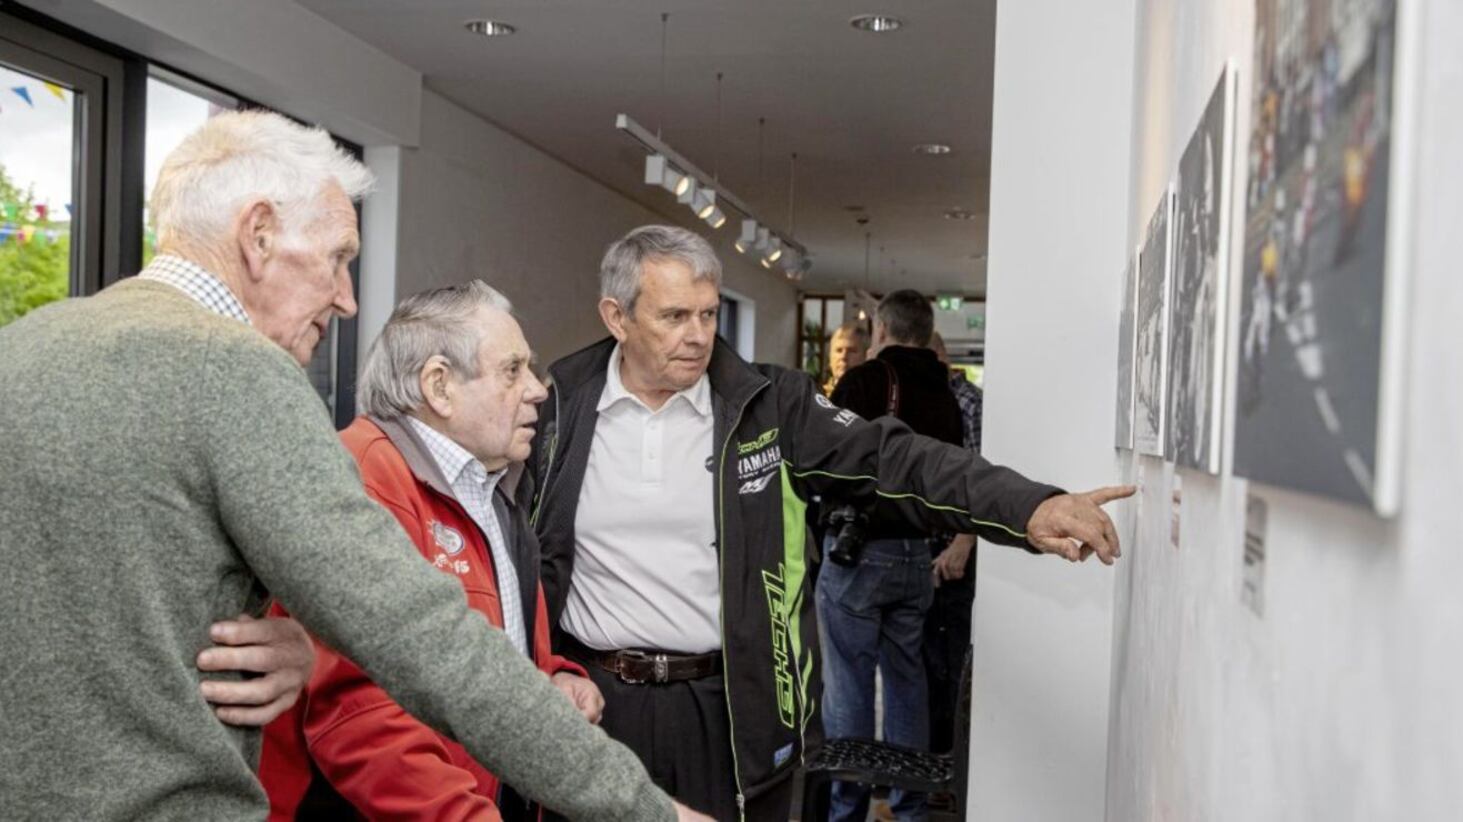 Famous past NW200 racers, two-time winner Dick Creith (left) and Len Ireland (centre) at the photographic exhibition at Roe Valley Arts and Cultural Centre, which features images taken from the book the &lsquo;NW200 90th Road &amp; Race&rsquo;, by Ian Foster. Picture by McAuley Multimedia 